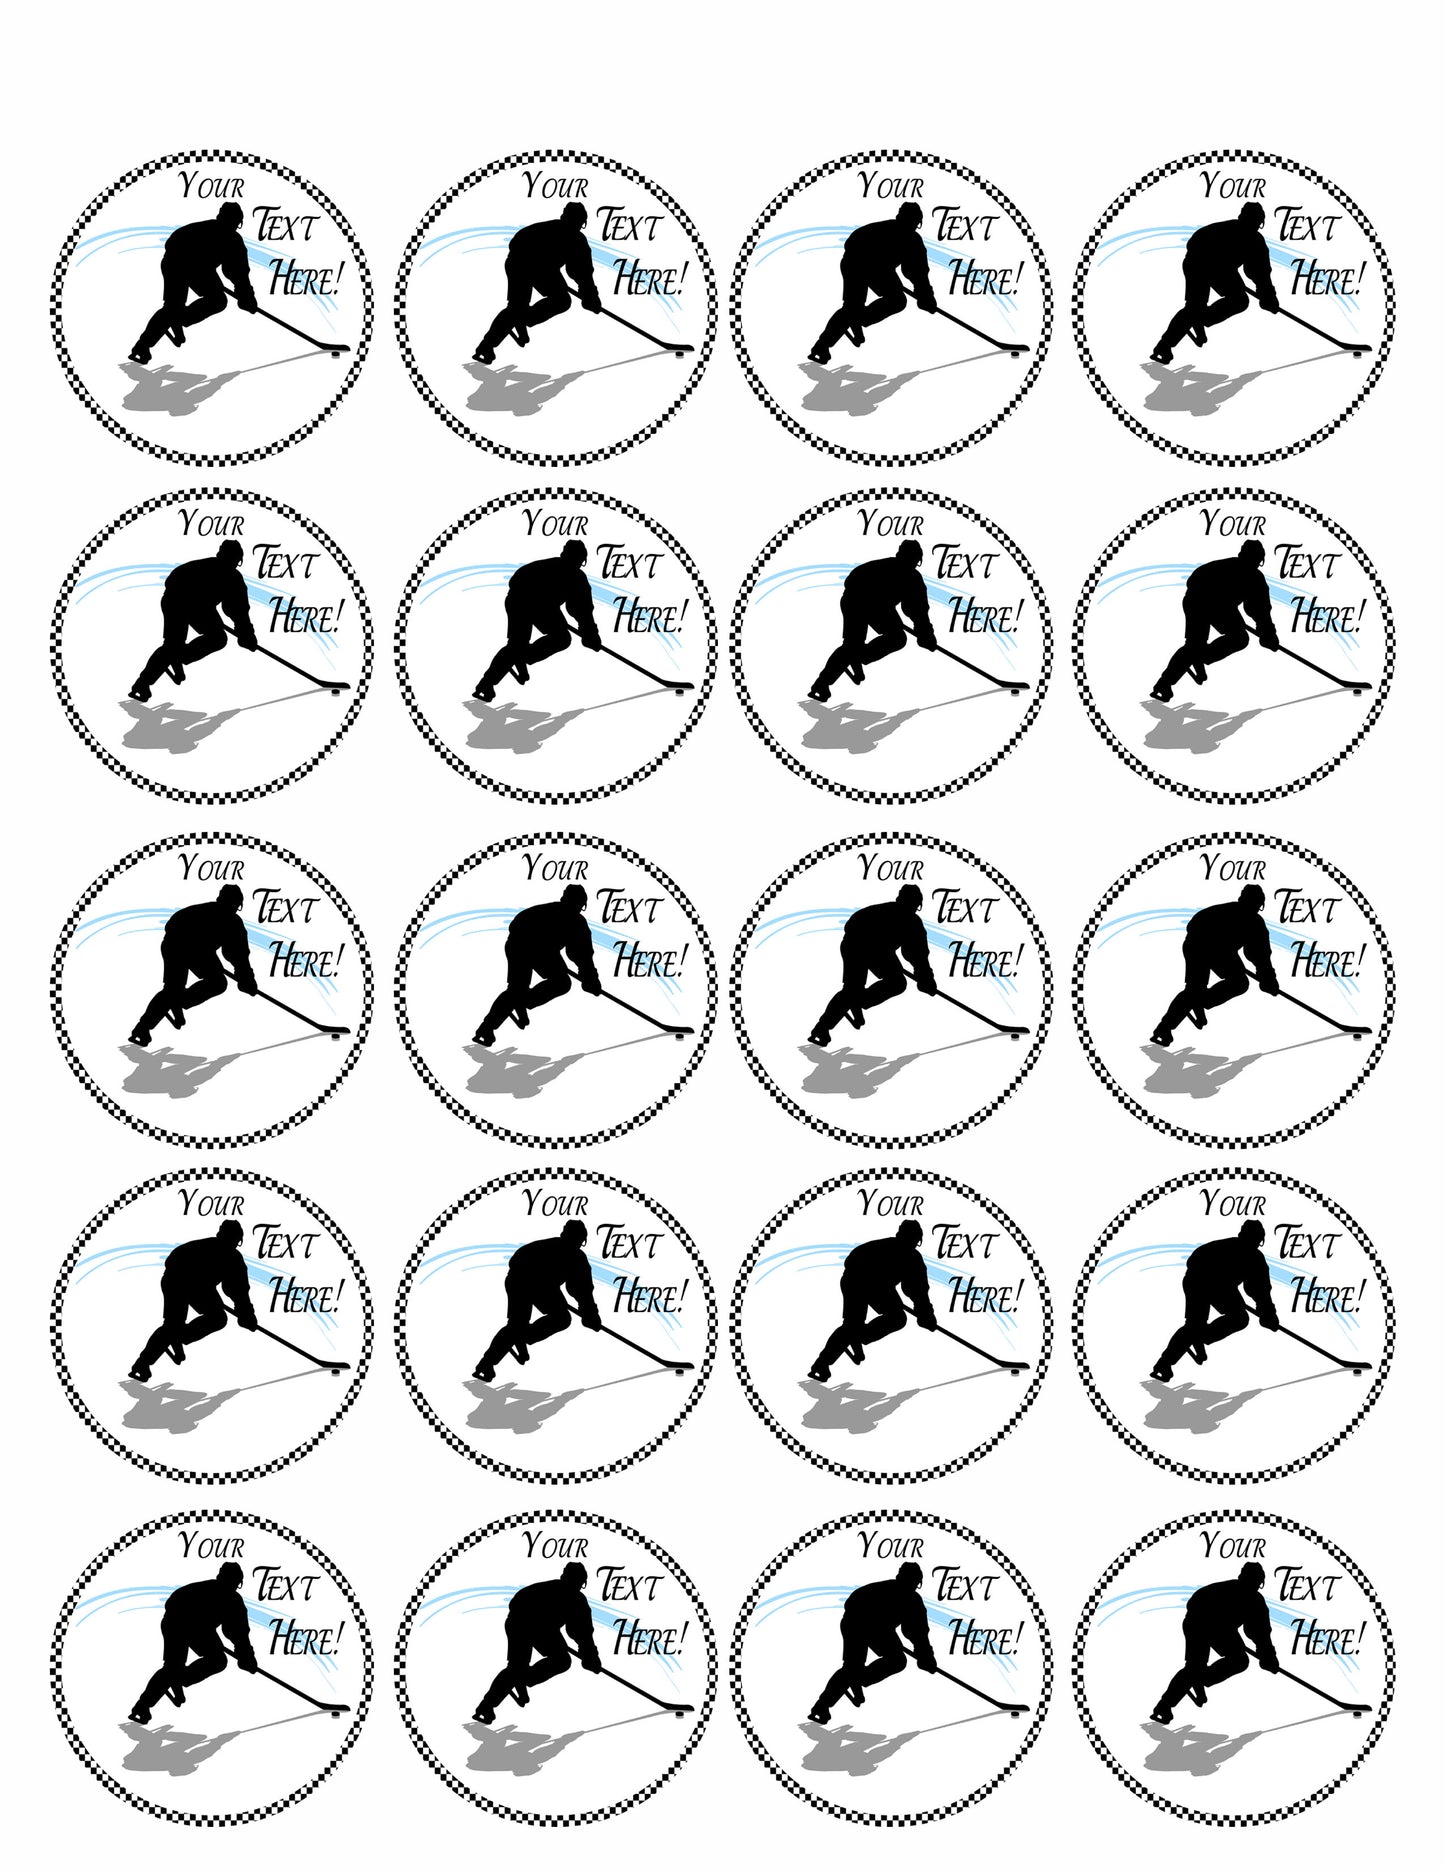 Hockey Player (Nr2) - Edible Cake Topper, Cupcake Toppers, Strips